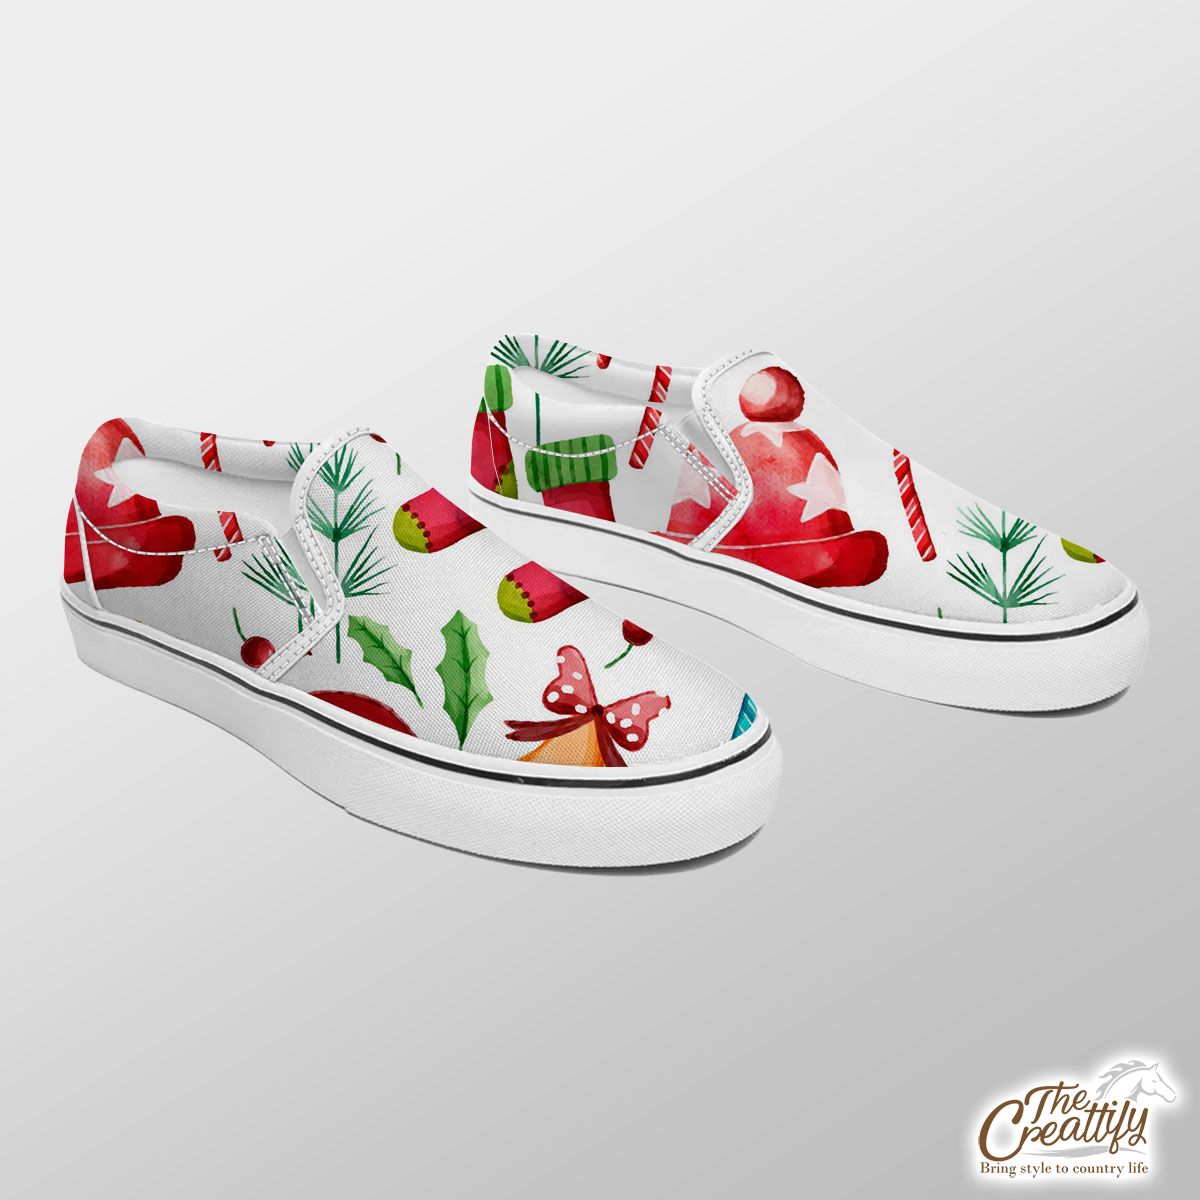 Santa Claus, Christmas Hat, Red Socks, Candy Canes, Bells And Holly Left Slip On Sneakers